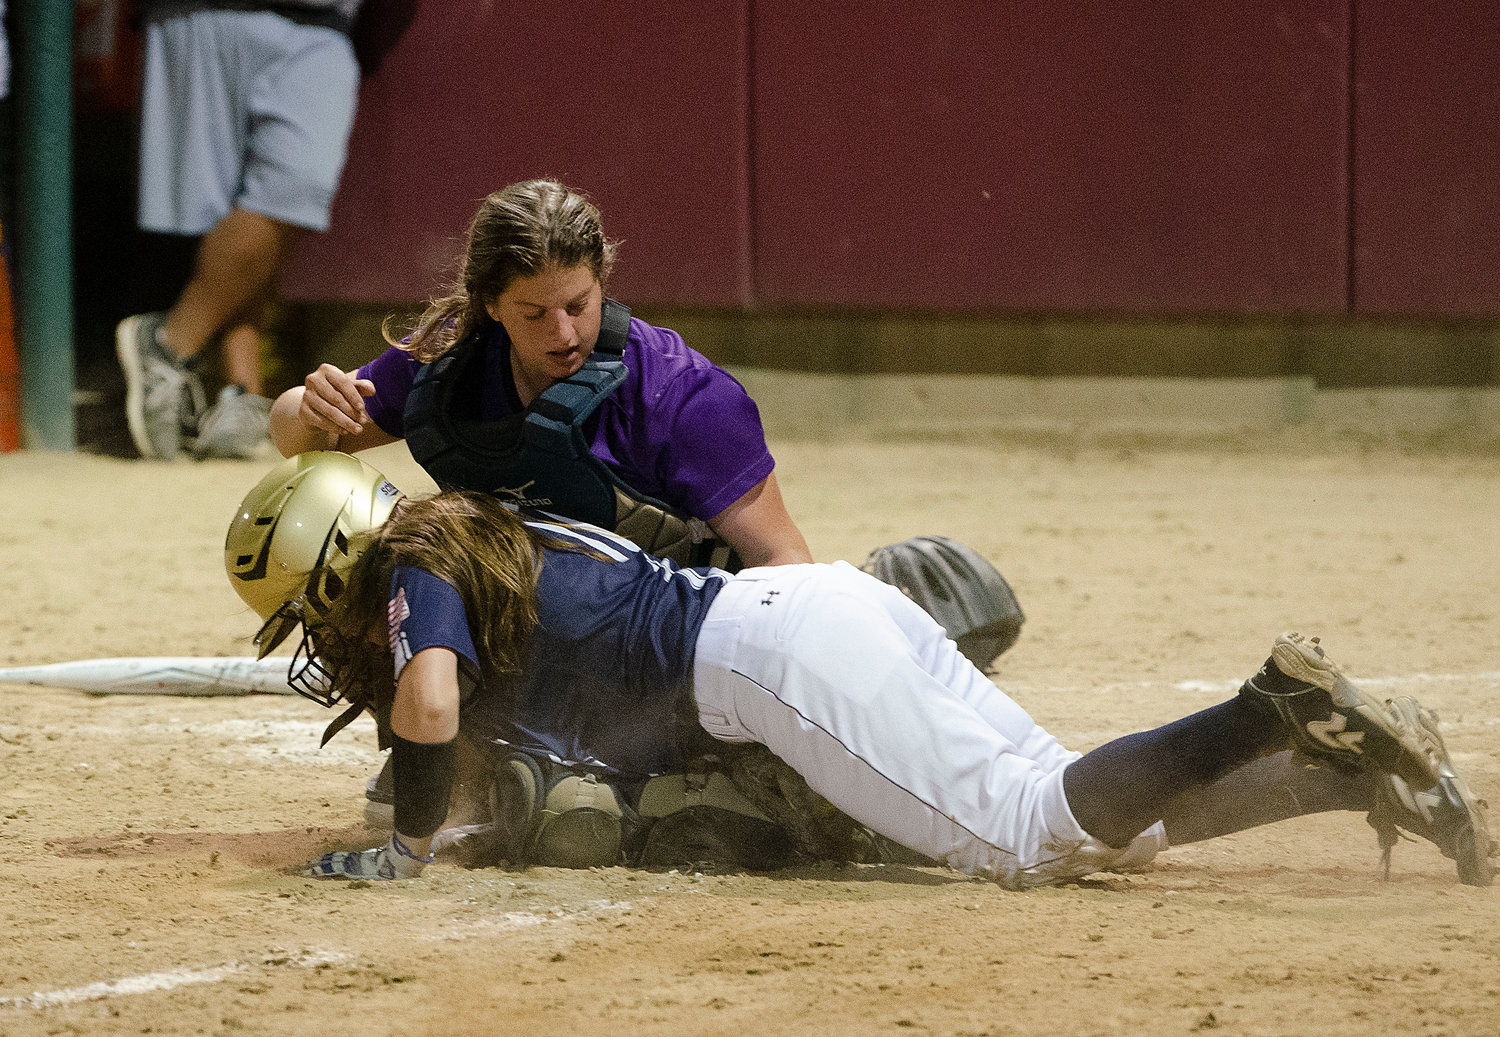 Catcher Grace Stephenson blocks the plate and tags out Kaitlyn Gould in the fifth inning. Left fielder Elsa White assisted on the play.